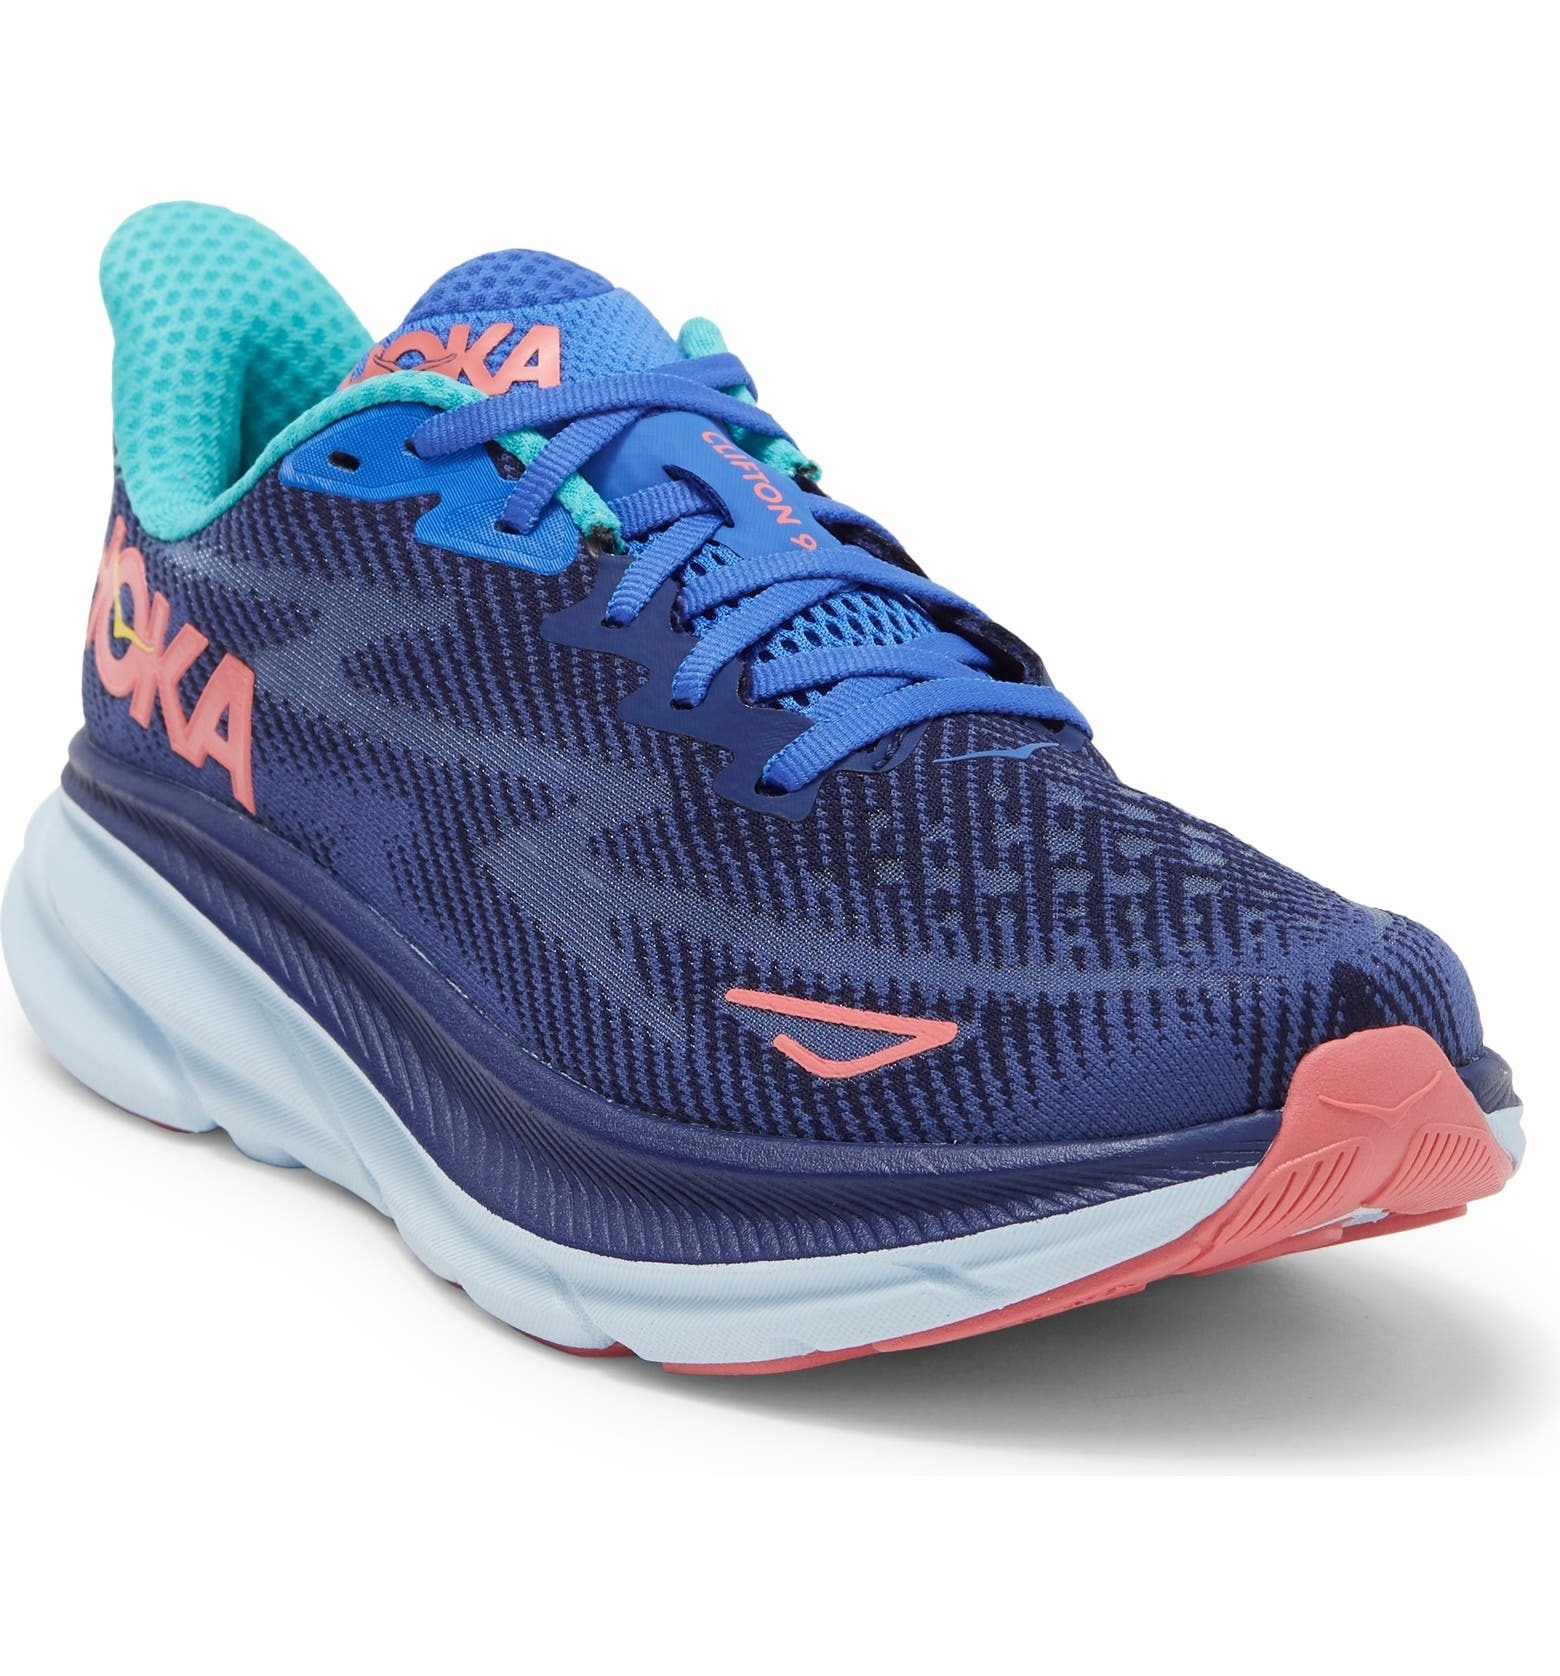 Hoka Sneakers Review: Why I Regret Doubting The Hype